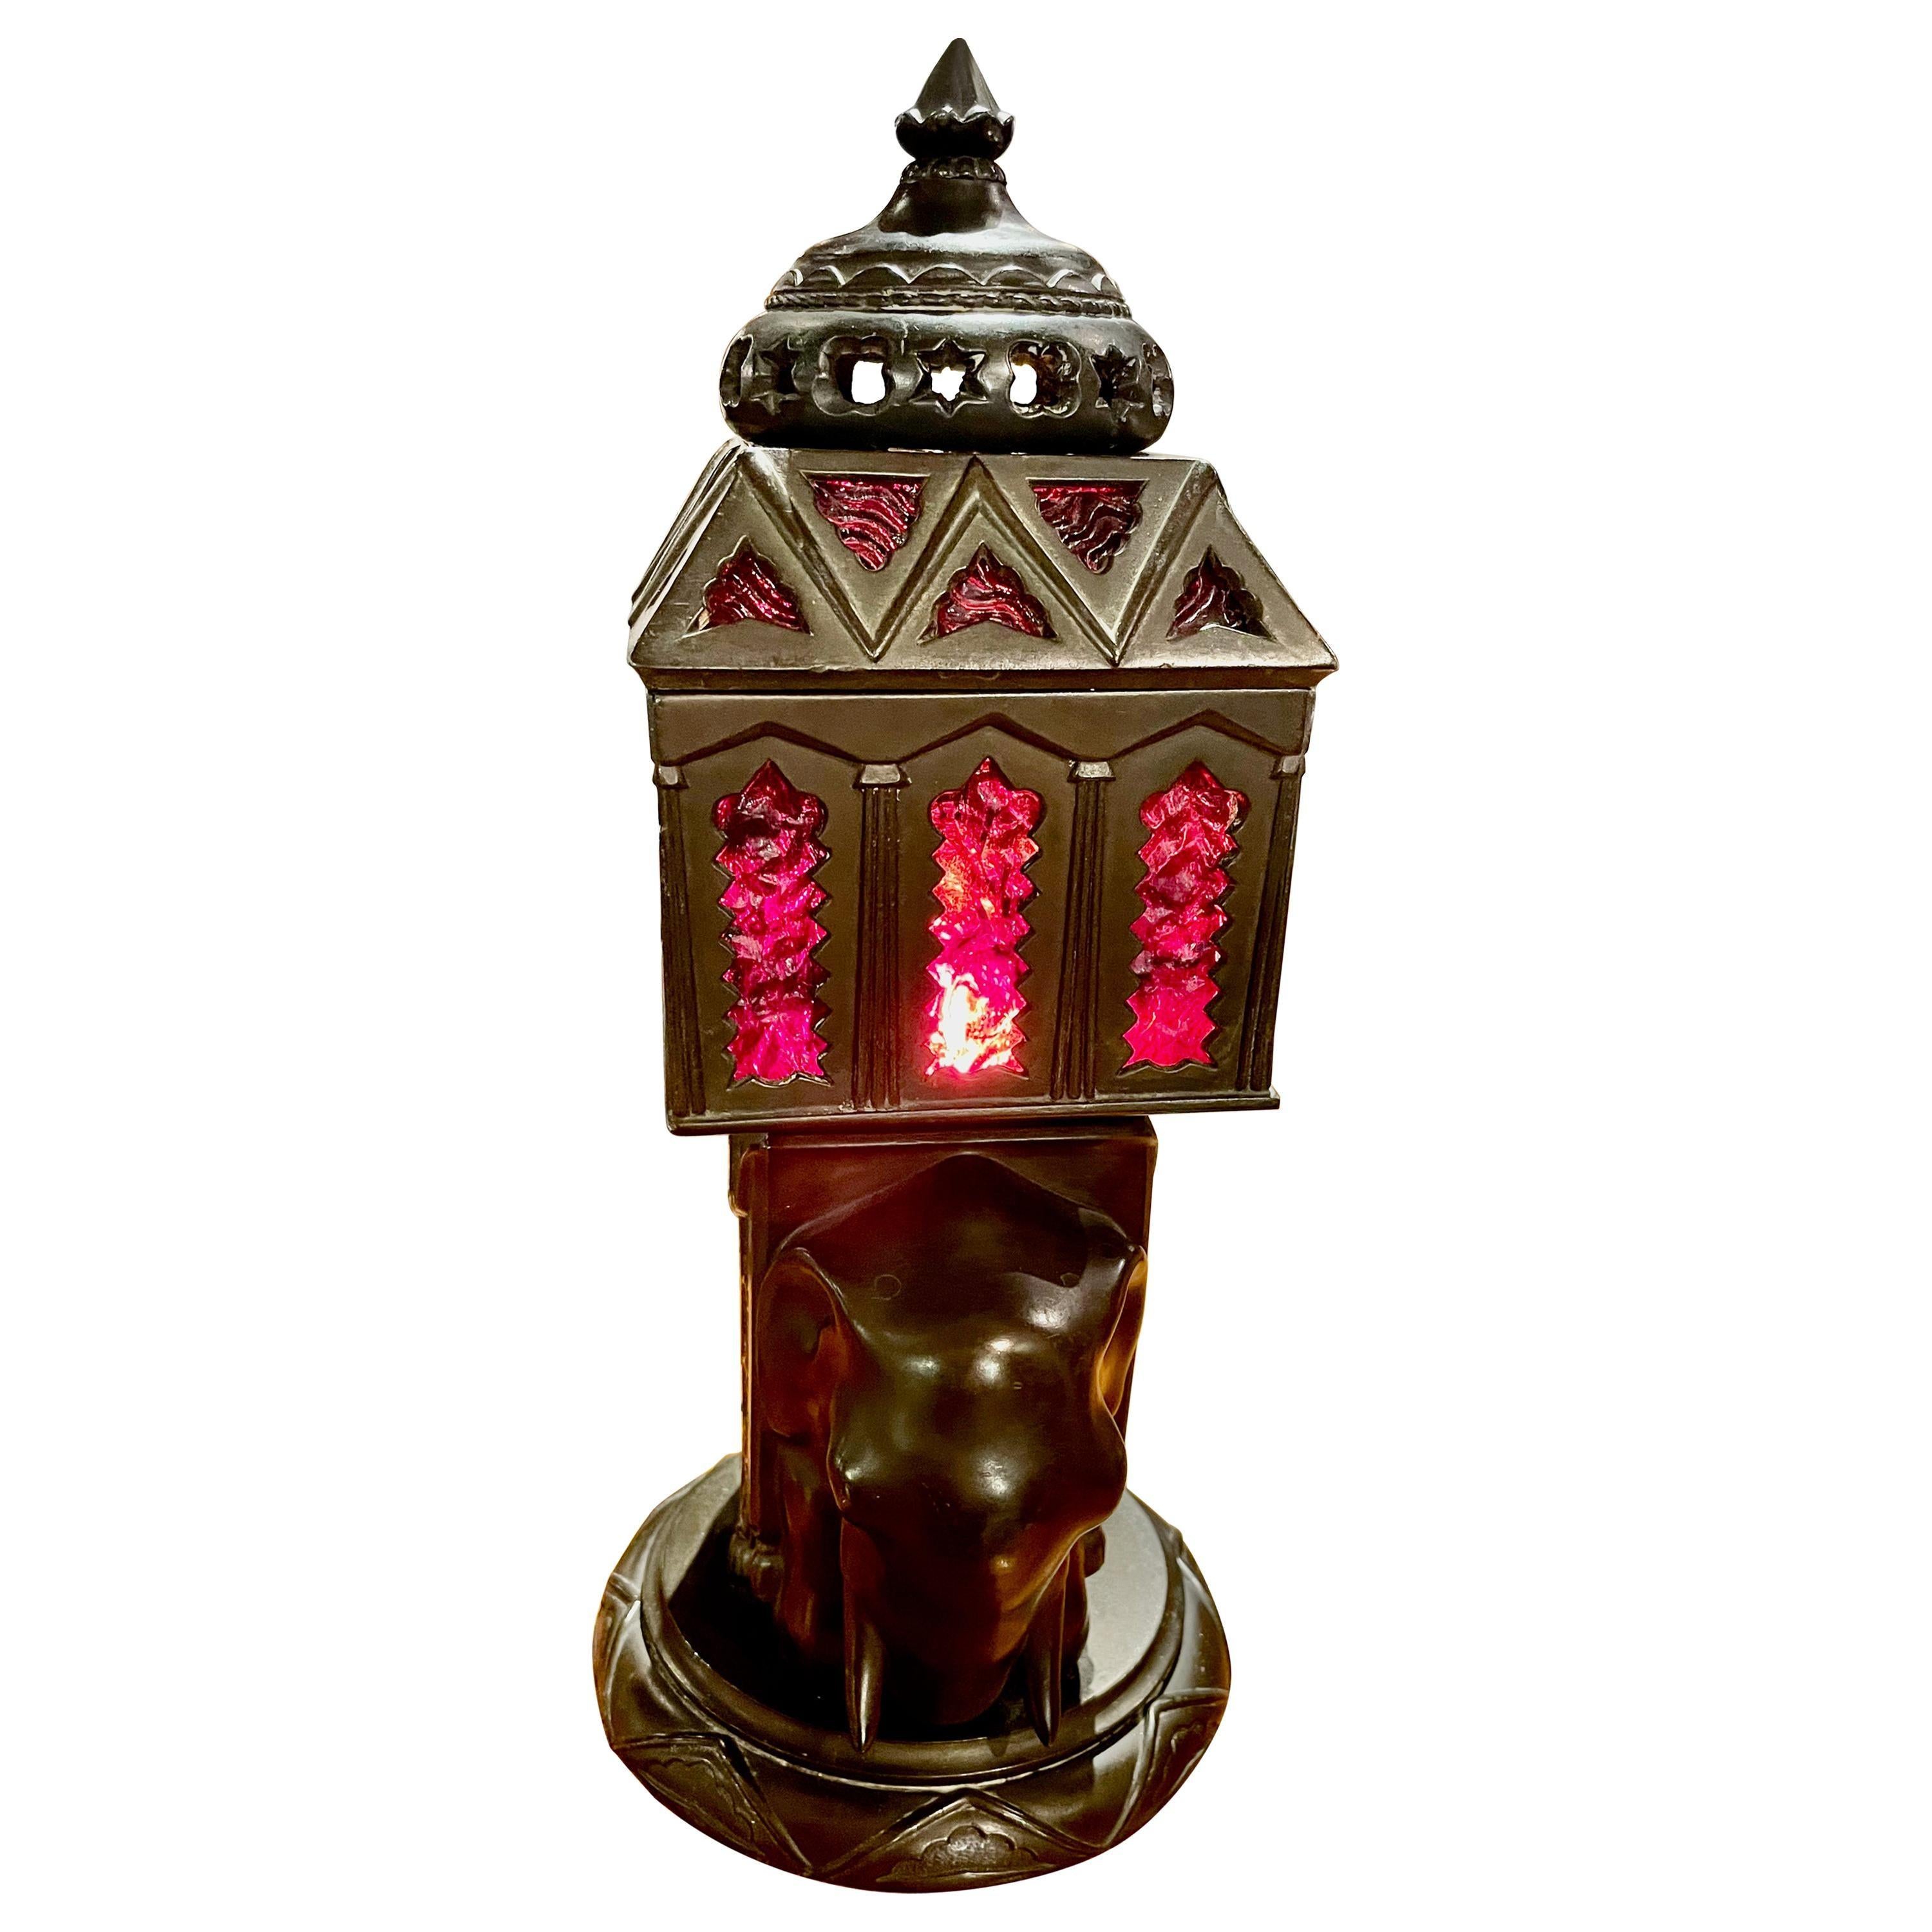 Art Deco elephant sculpture lamp French 1930, patinated art metal with antique red glass inlay. Excellent condition mood lamp with detailed embossed metal patterns of mosaic designs representing both Indian and Middle Eastern motifs. This is evident